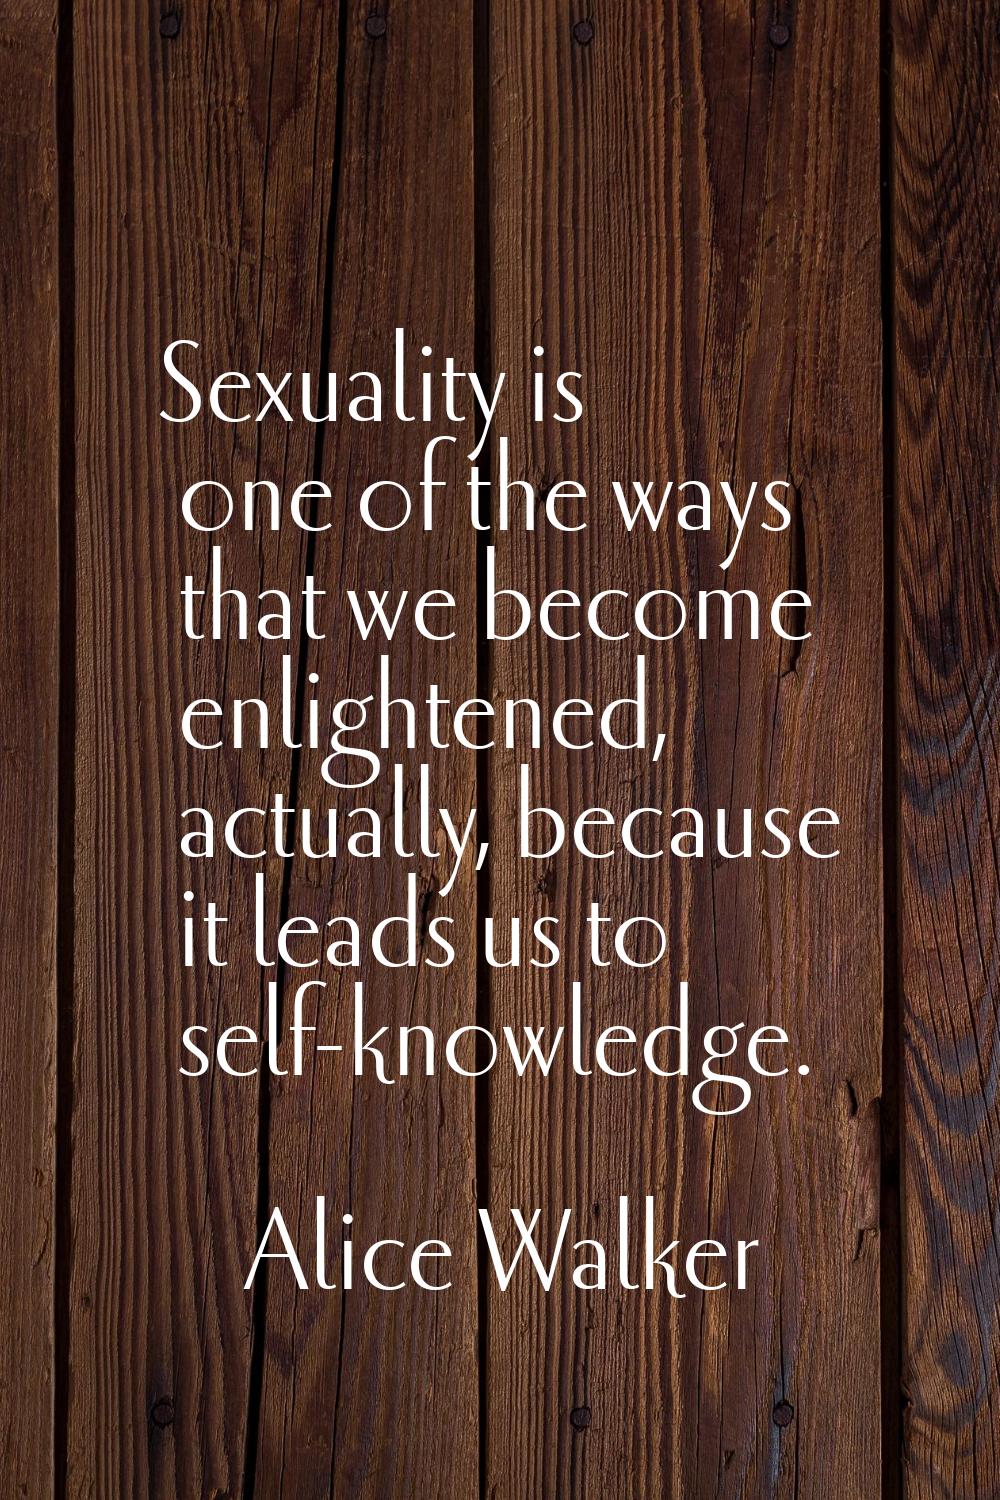 Sexuality is one of the ways that we become enlightened, actually, because it leads us to self-know